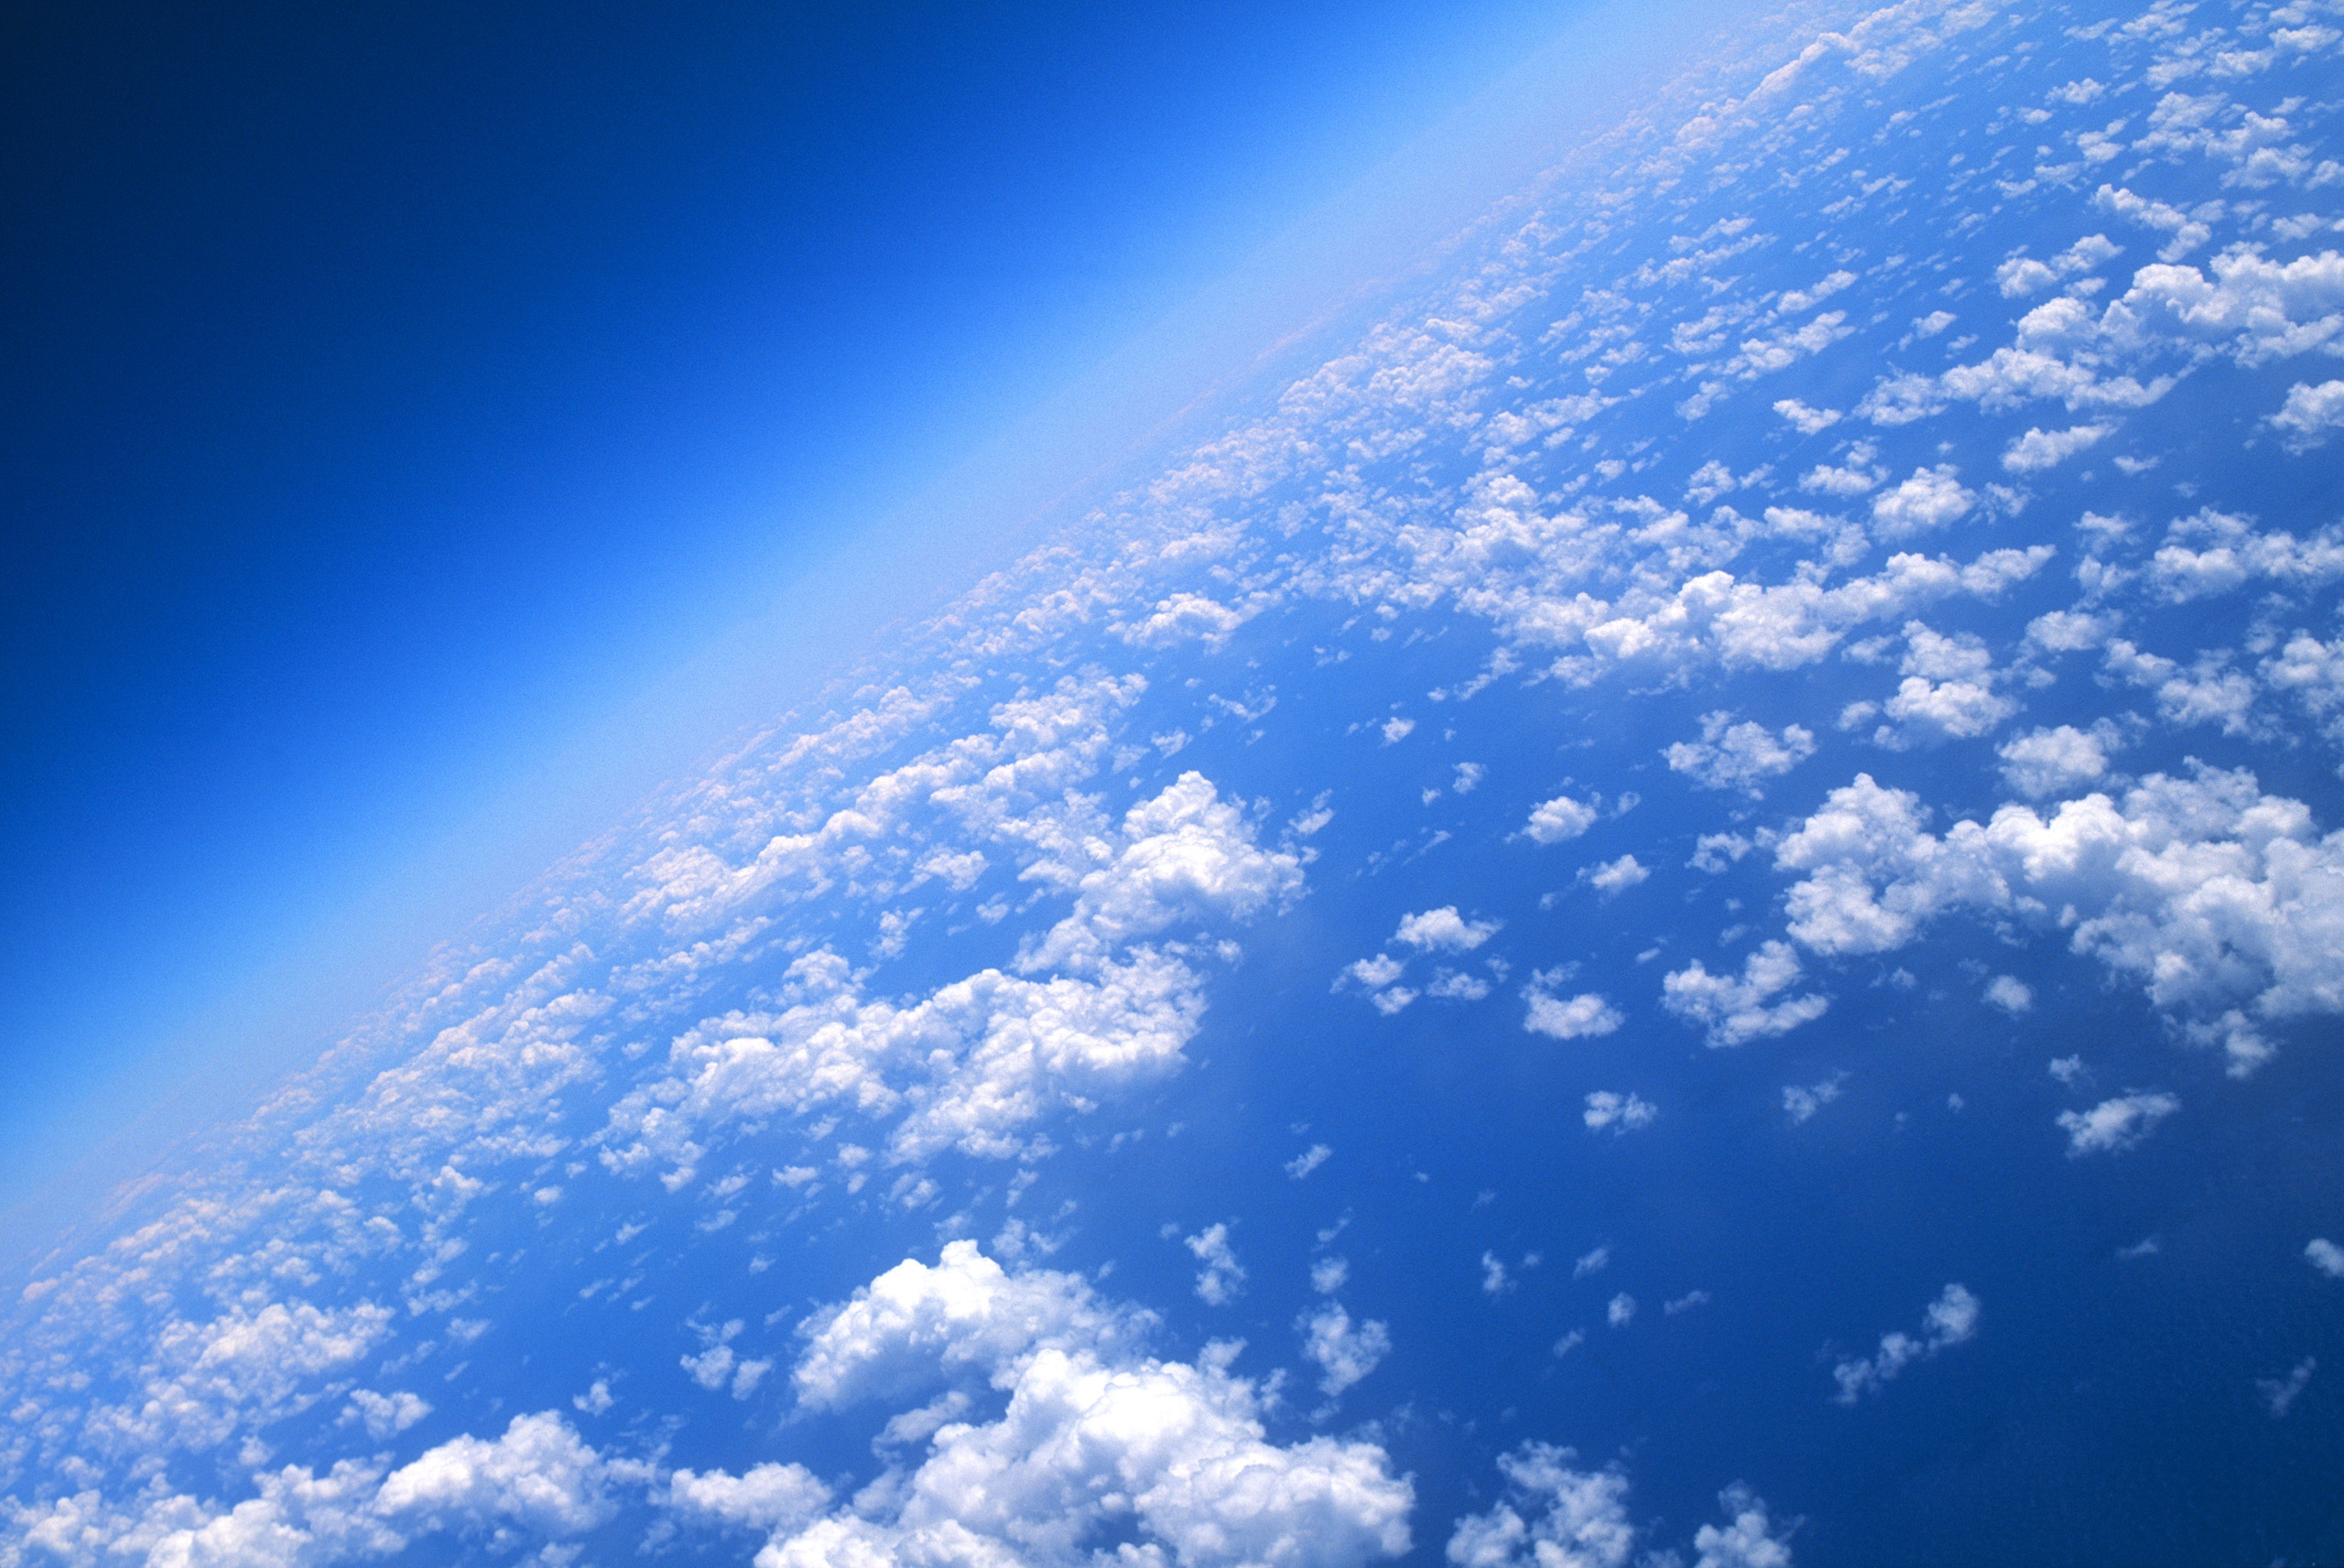 View of world from 40000 feet, clouds and blue sea.